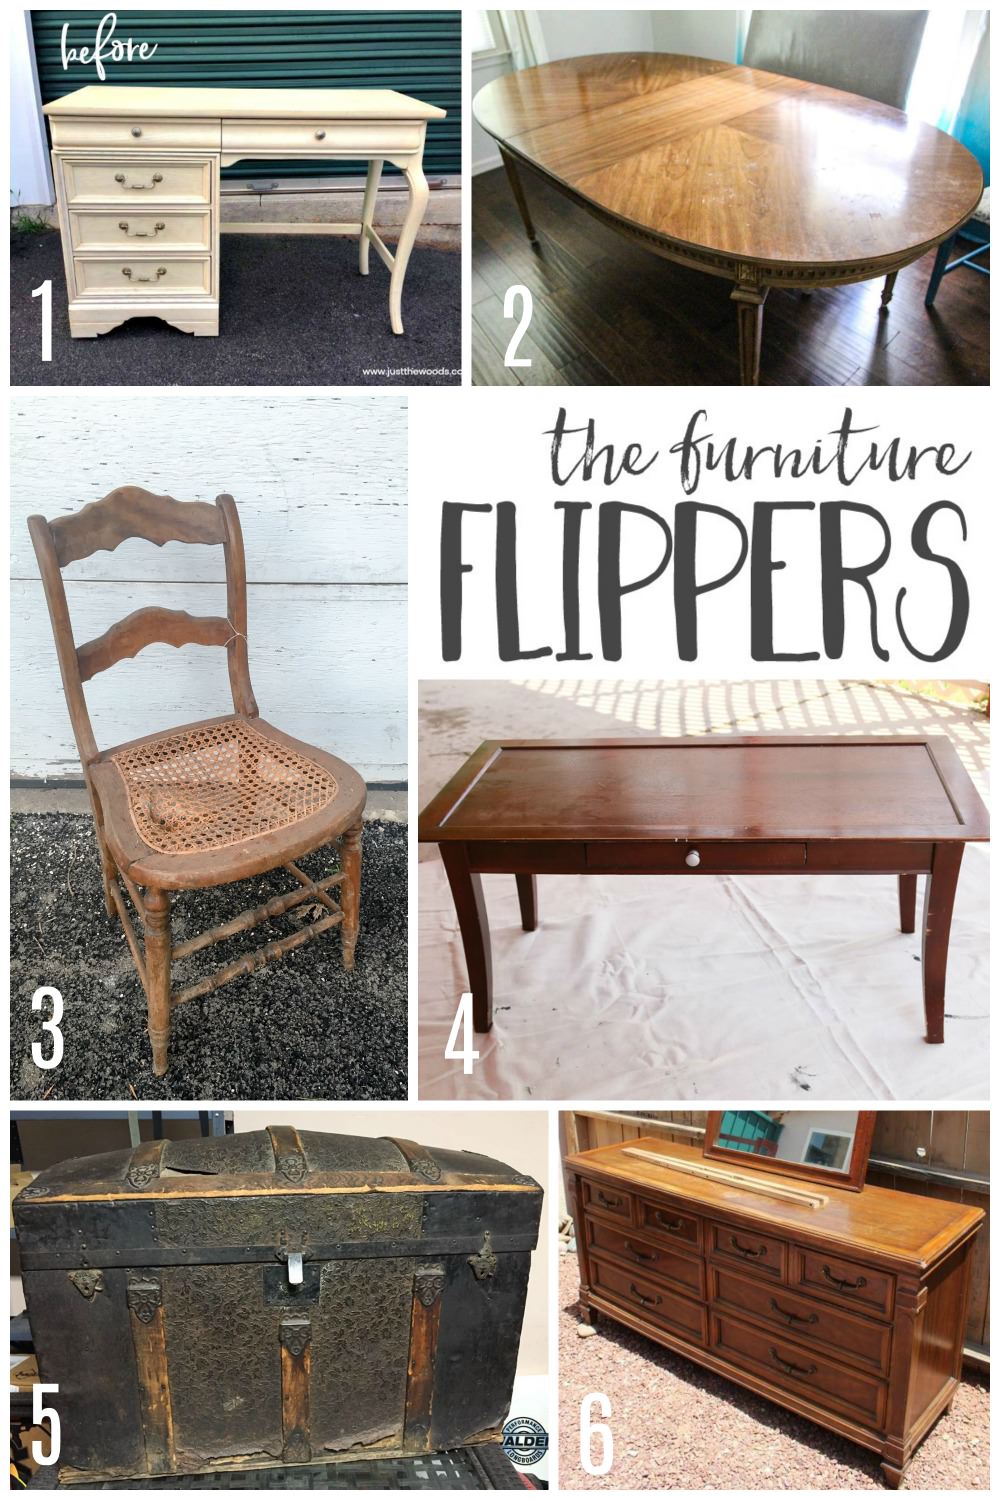 How To Refinish Furniture With The Furniture Flippers September